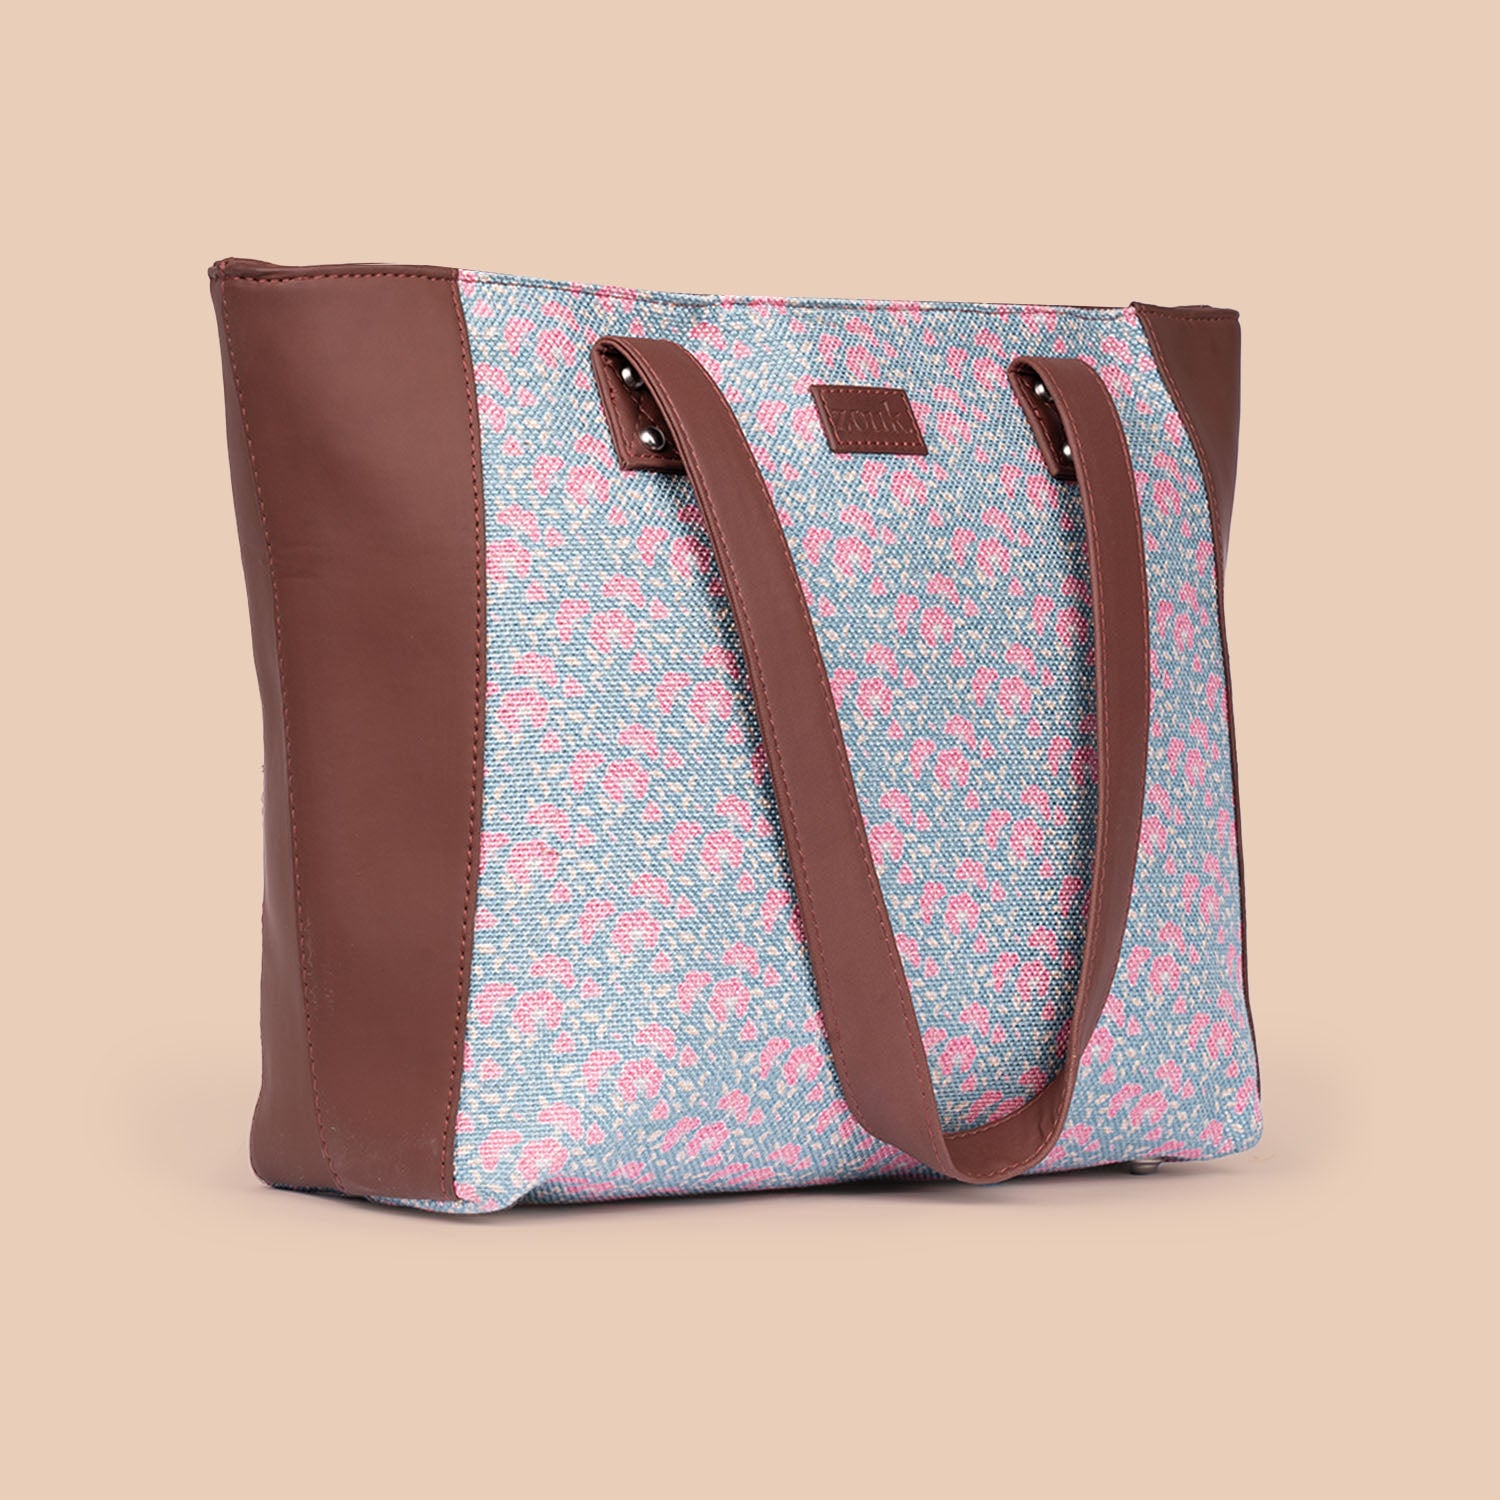 Chettinad Florals Side Tote Bag